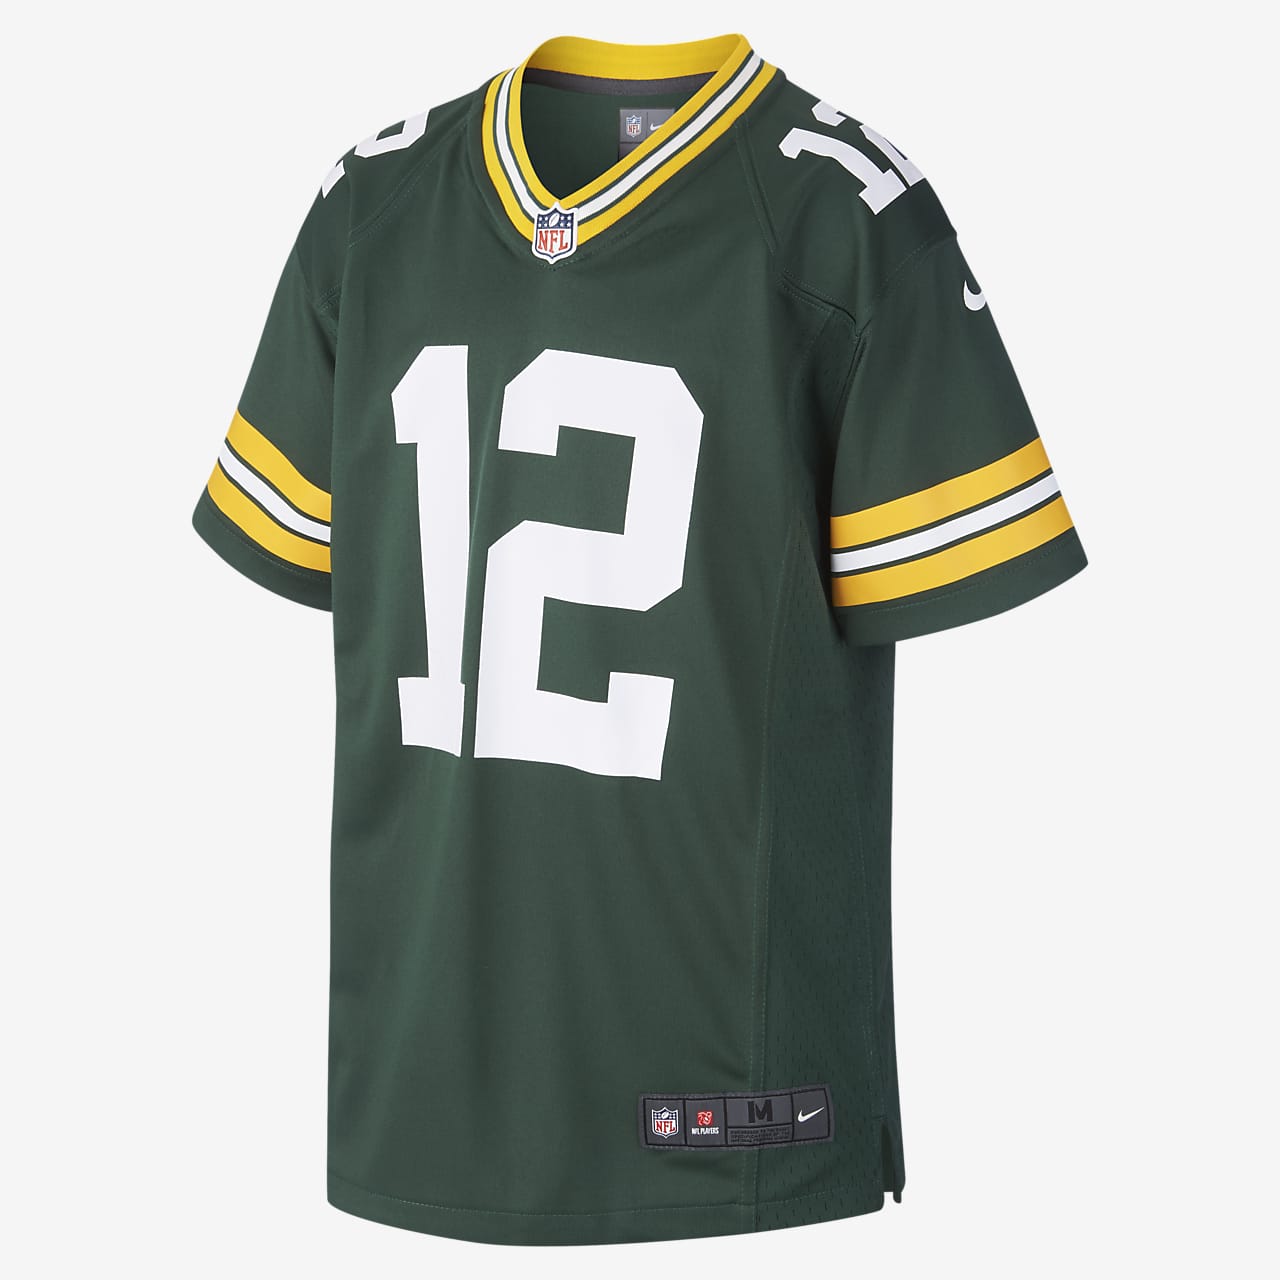 NFL Green Bay Packers Game Jersey (Aaron Rodgers) American-Football-Trikot für ältere Kinder